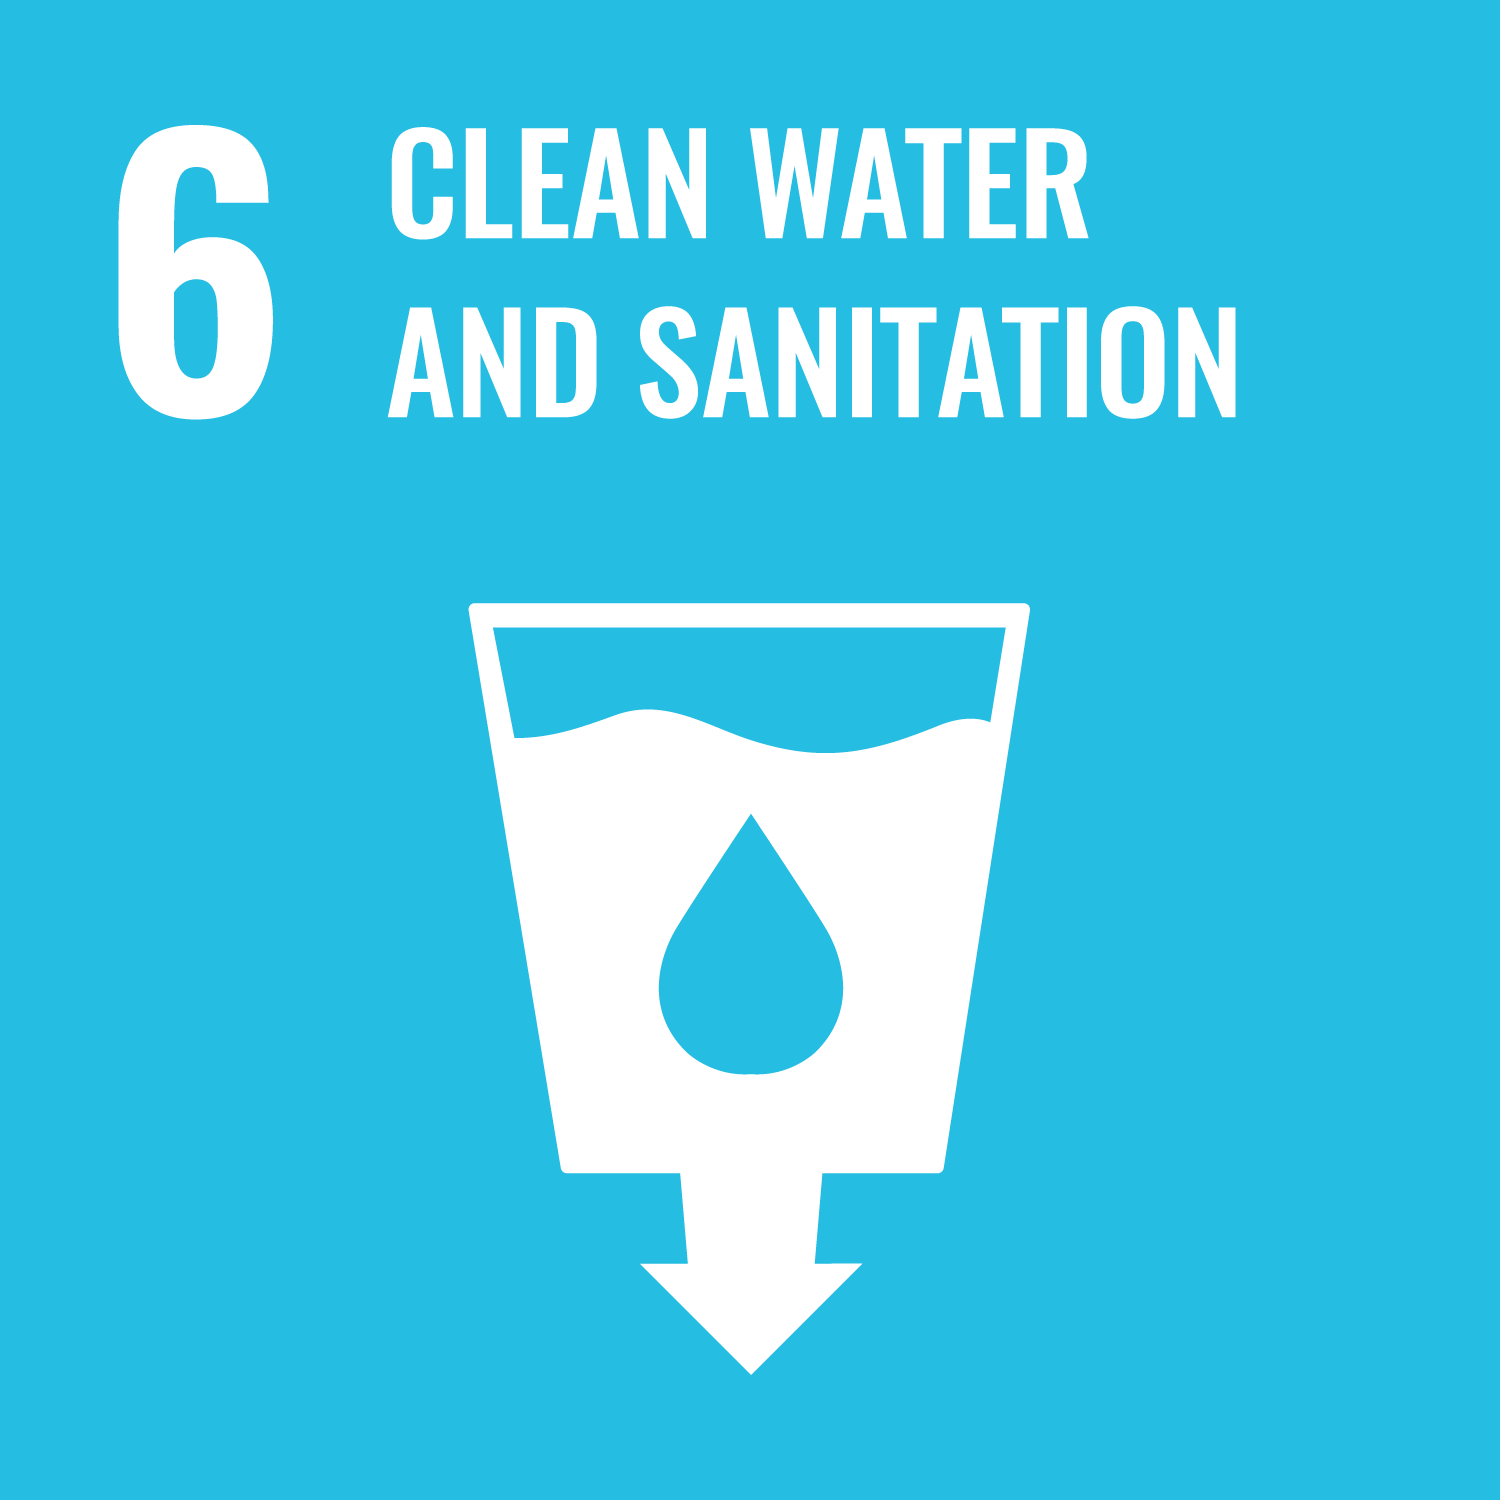 sustainable-development-goals-clean-water-and-sanitation